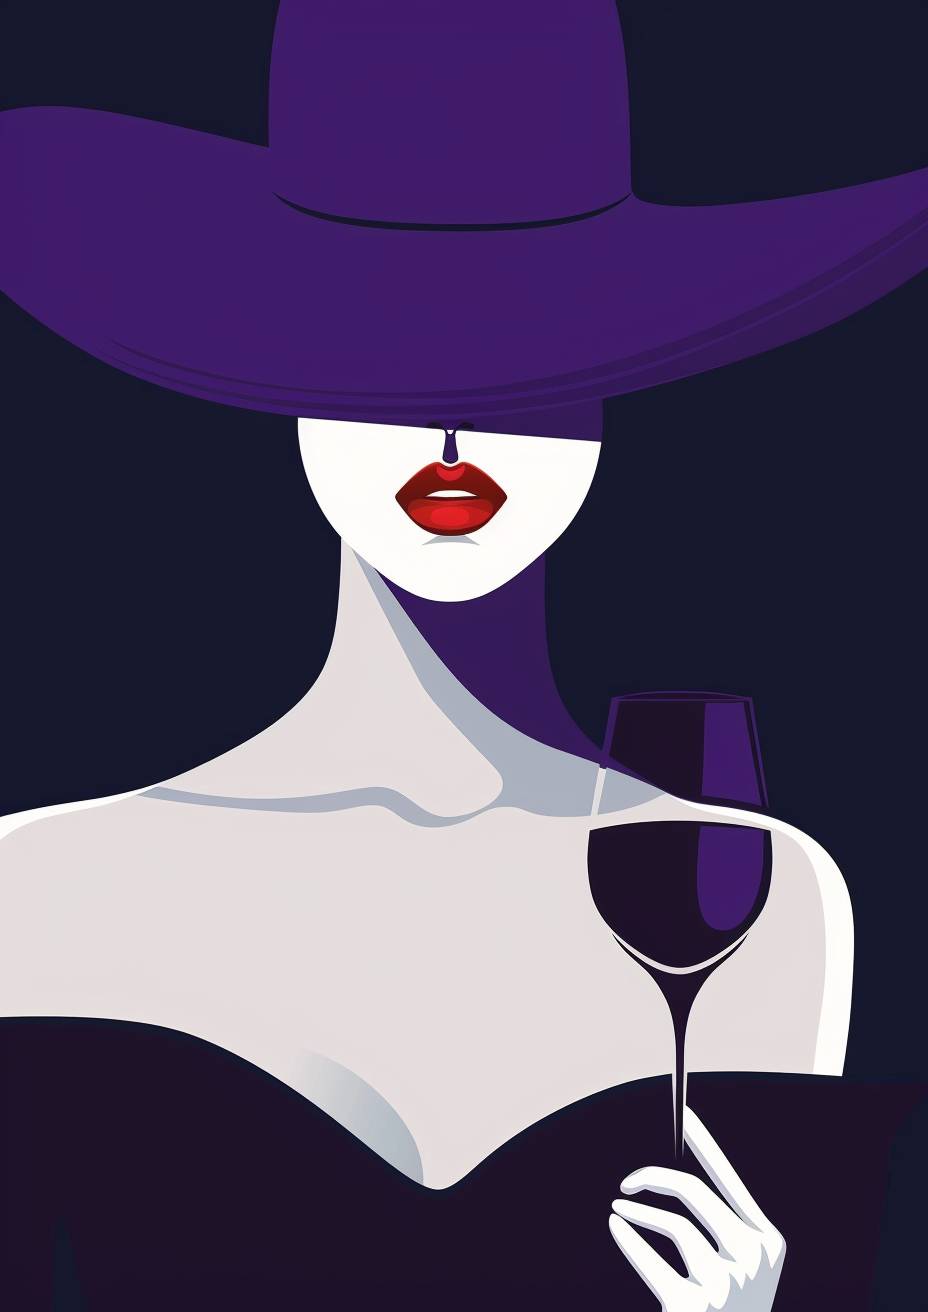 A minimalist poster design. A mysterious woman with purple hat, white skin and red lips wearing a black dress. She is holding a glass of wine. Minimalist vector illustration in the style of Patrick Nagel. Deep blue background. Clean lines, bold shapes, sleek. Inspired by vintage fashion posters. High contrast. Monochromatic color scheme. Bold shadowing. Isolated on a dark navy background.